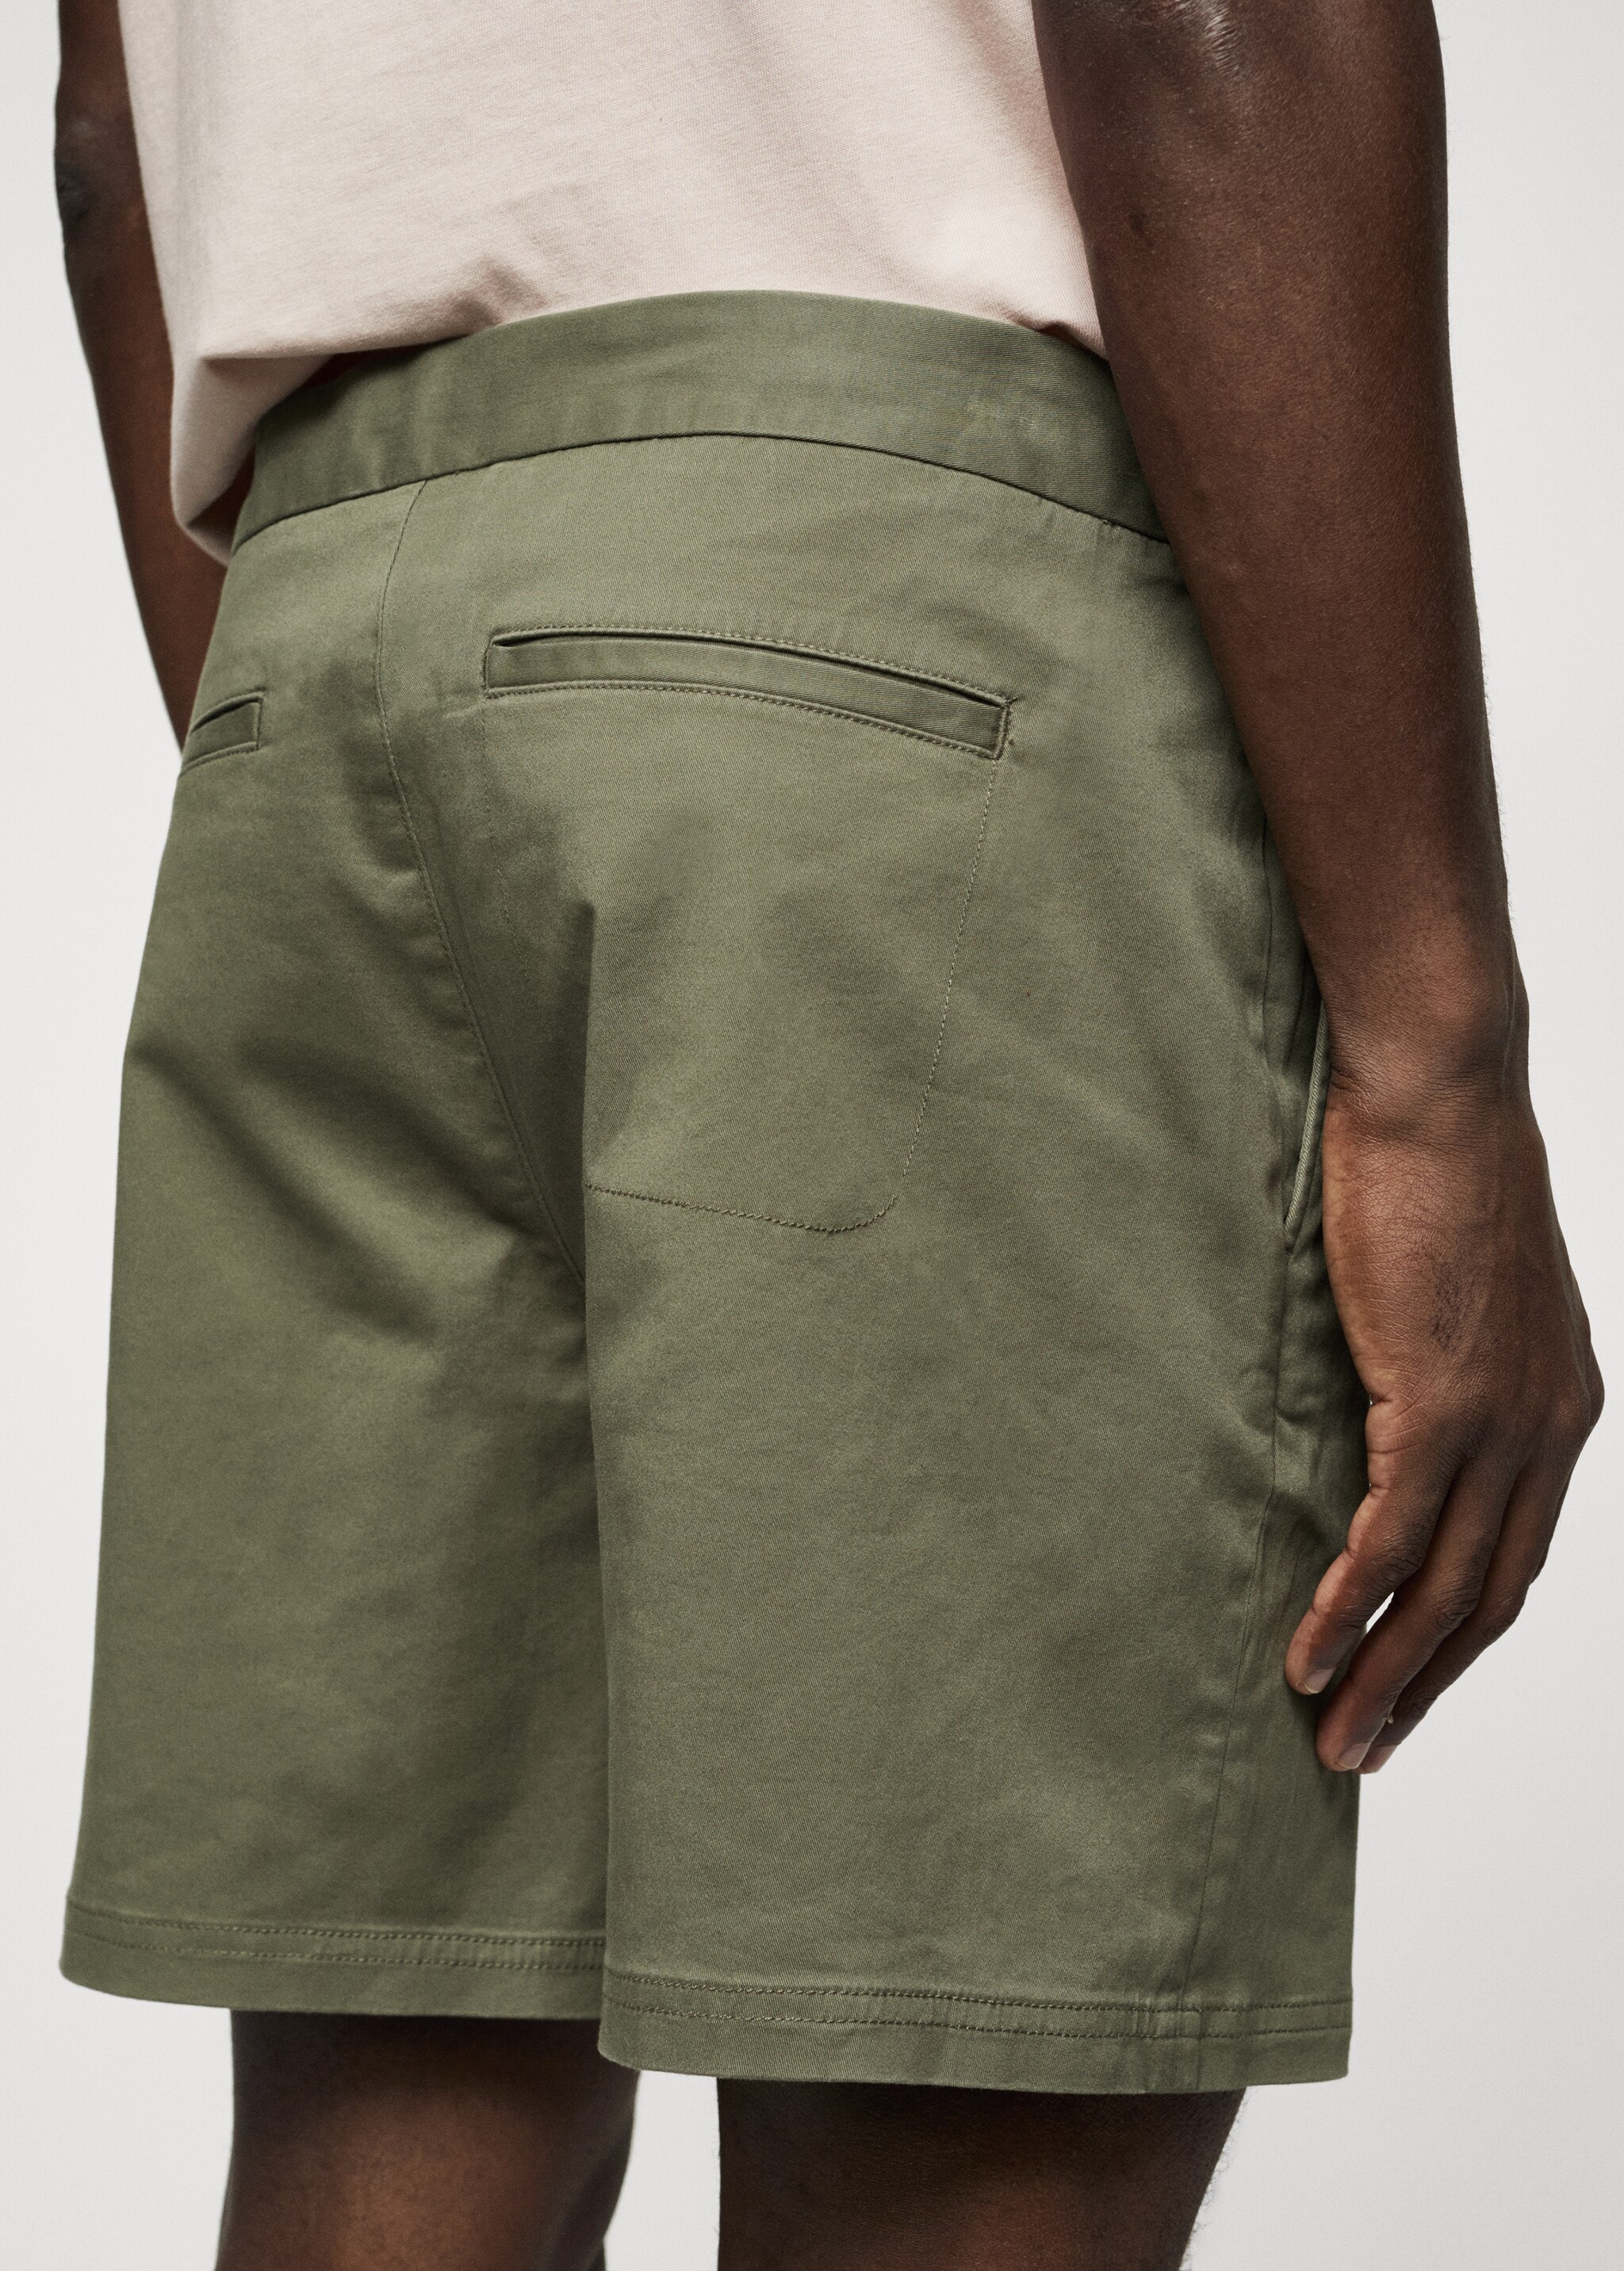 Cotton shorts with drawstring - Details of the article 6